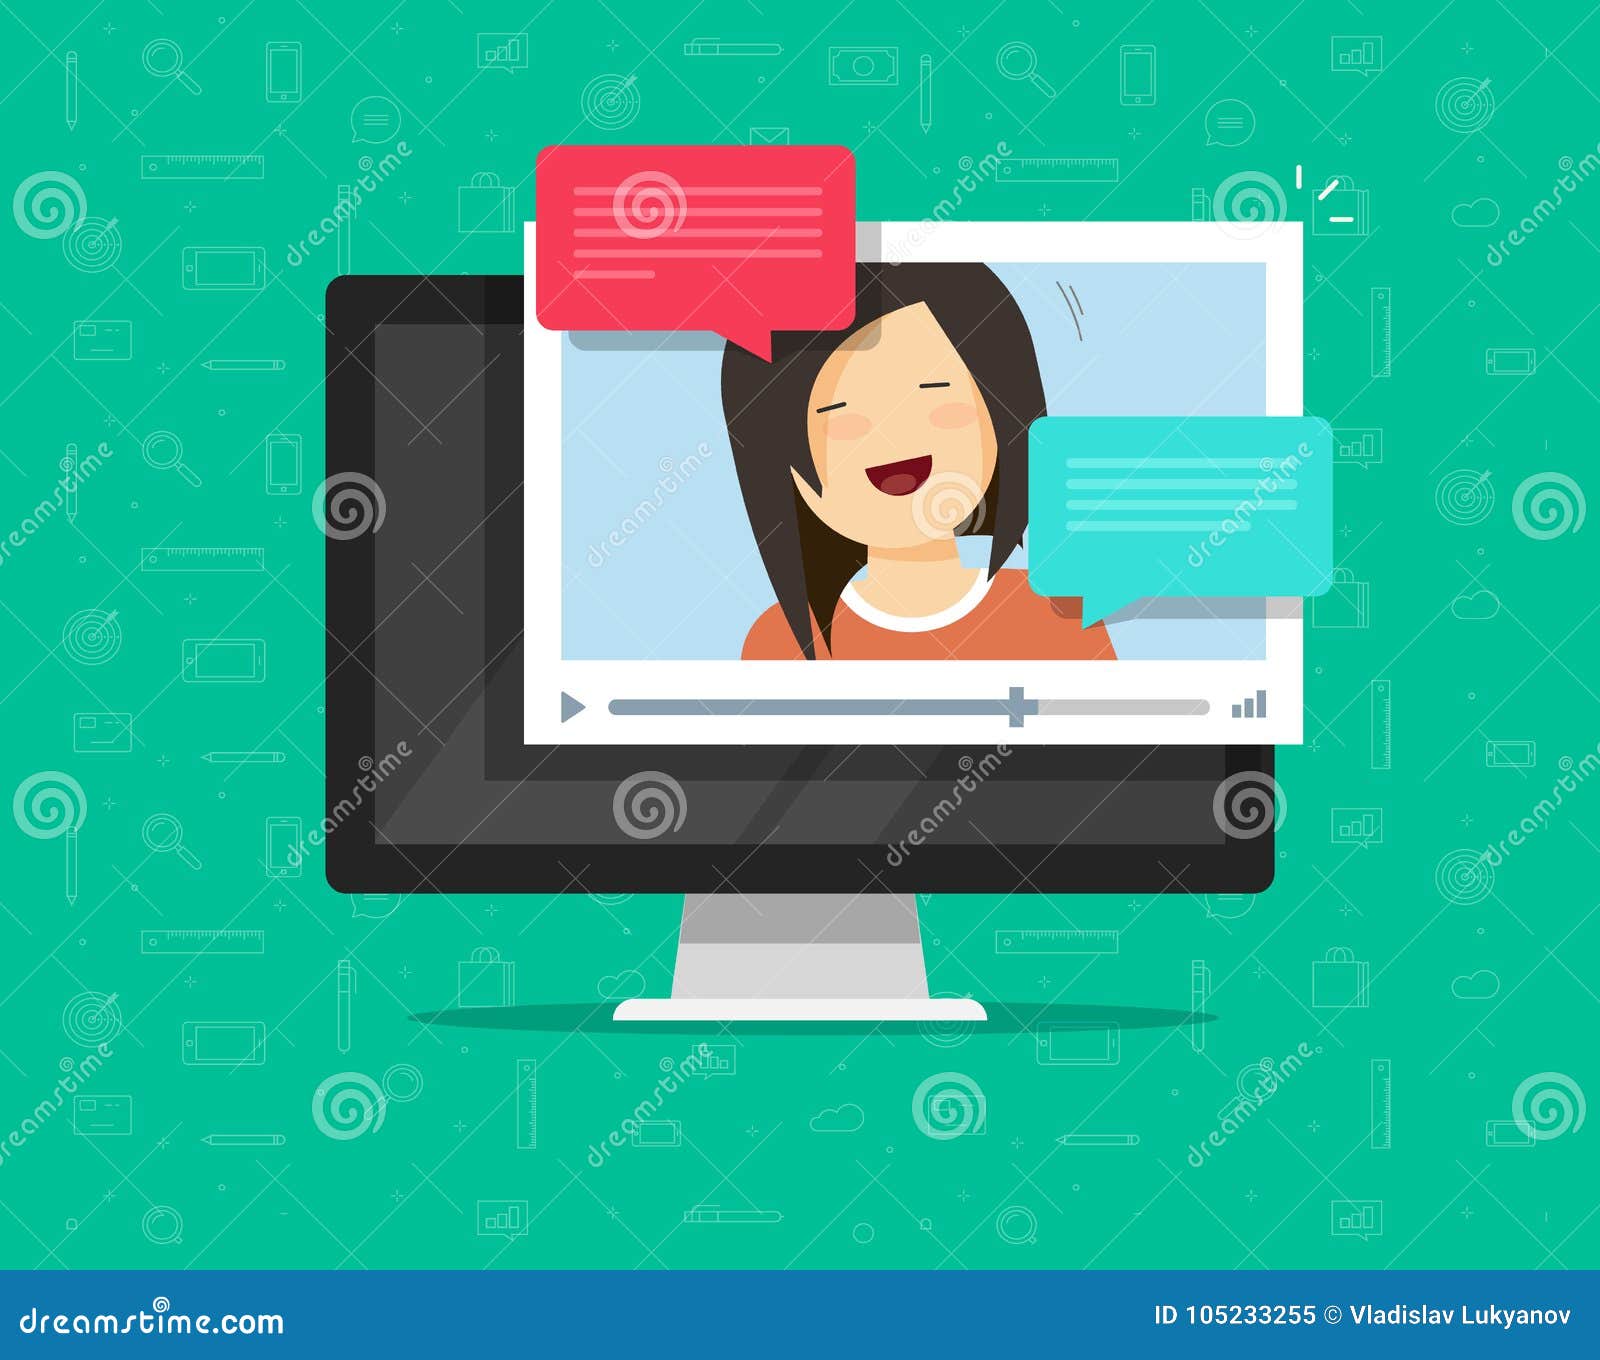 Video Chatting Online on Computer Vector Illustration, Flat Video Player  Window Stock Vector - Illustration of chatting, live: 105233255